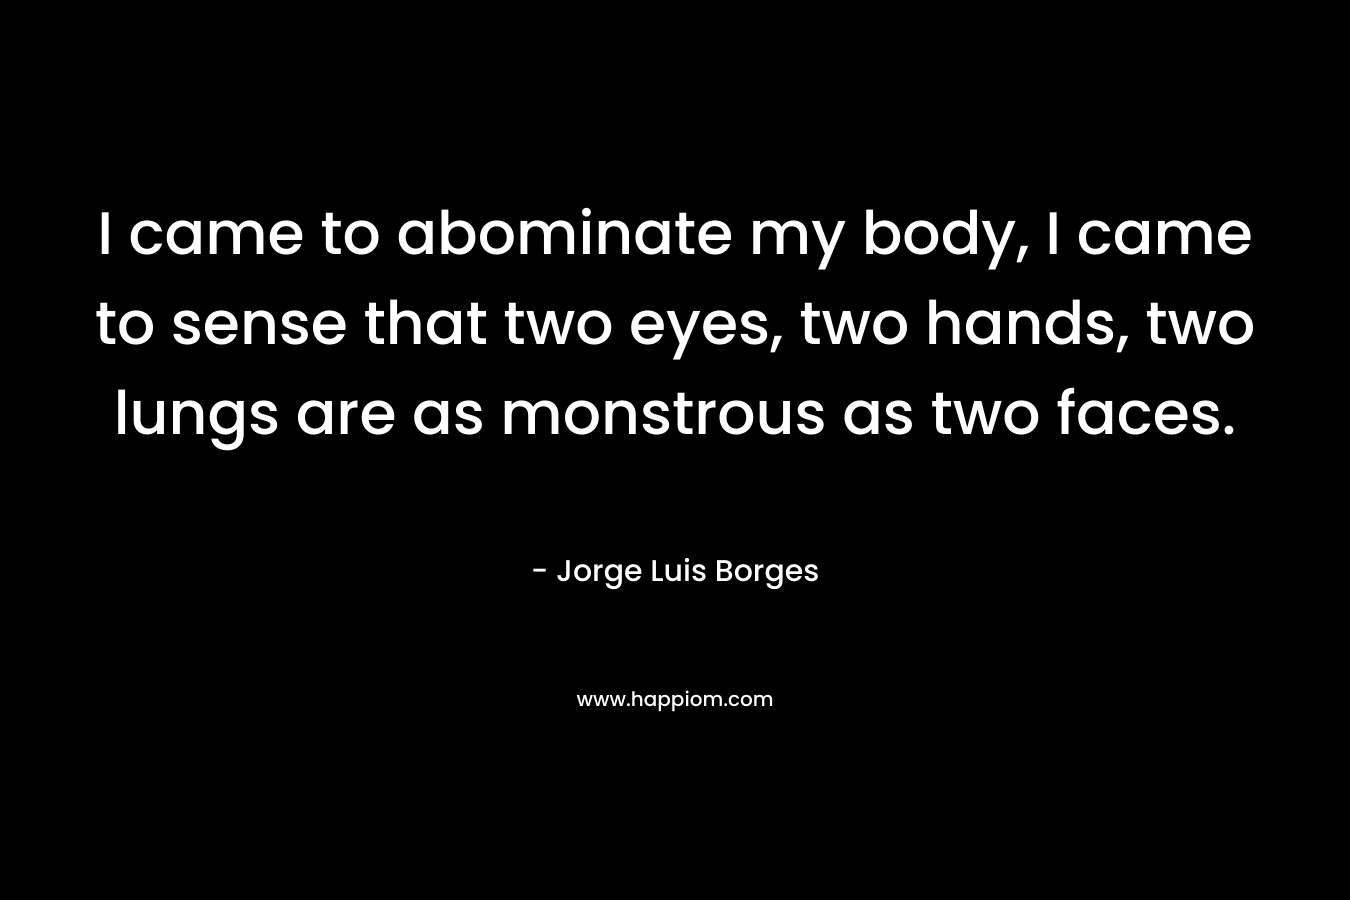 I came to abominate my body, I came to sense that two eyes, two hands, two lungs are as monstrous as two faces. – Jorge Luis Borges